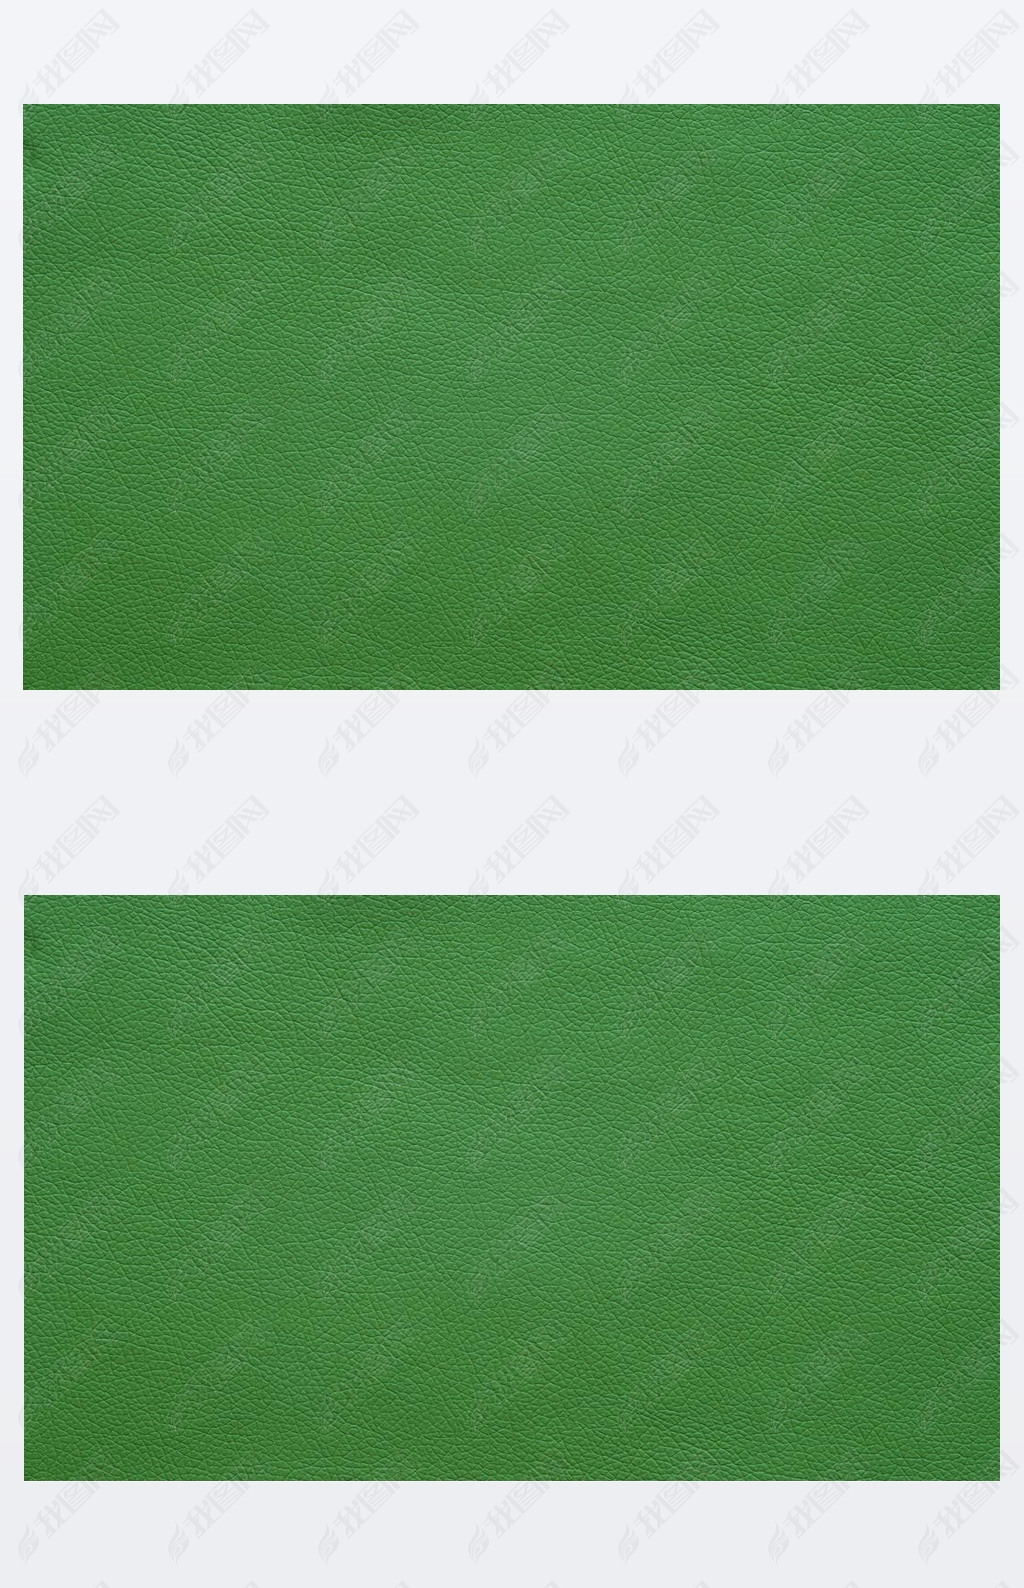 Large texture of bright green artificial leather, background.